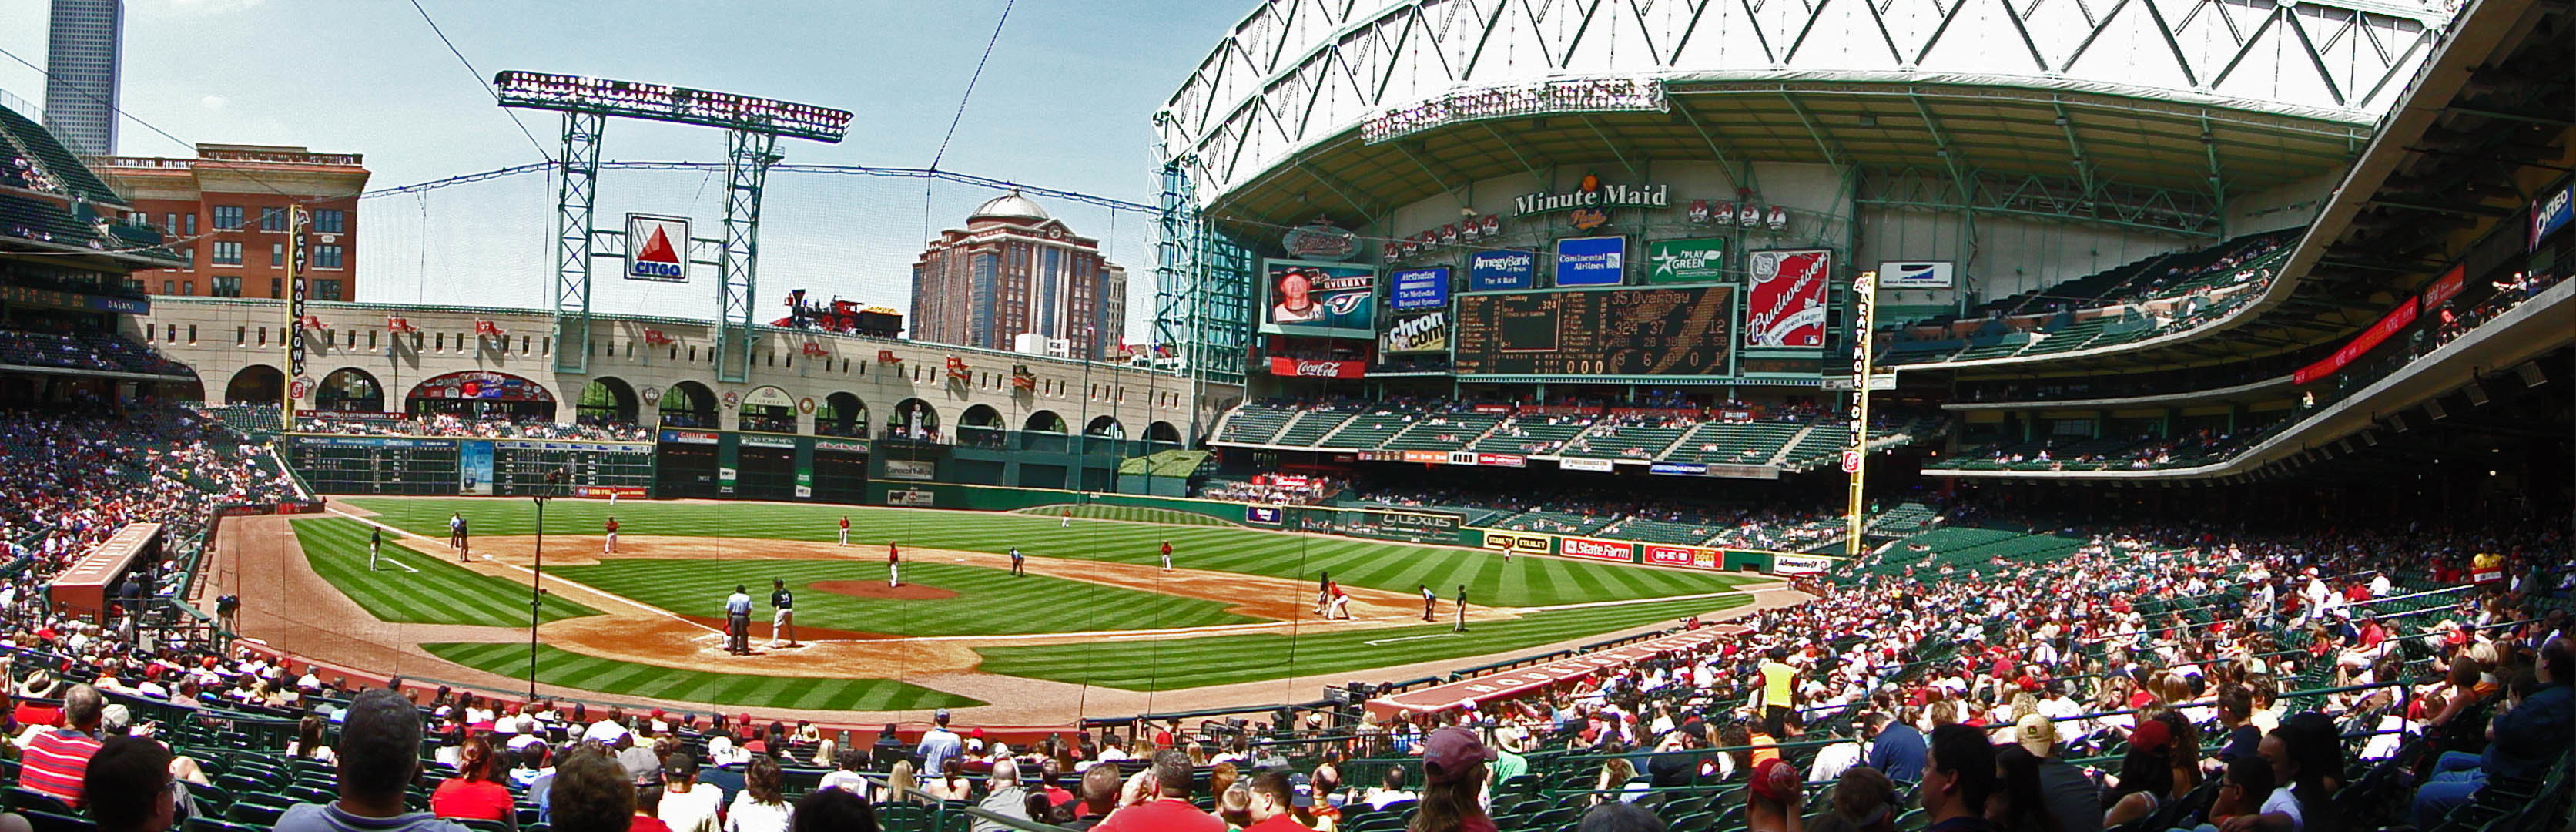 3345x1080 Night Out at Minute Maid Park